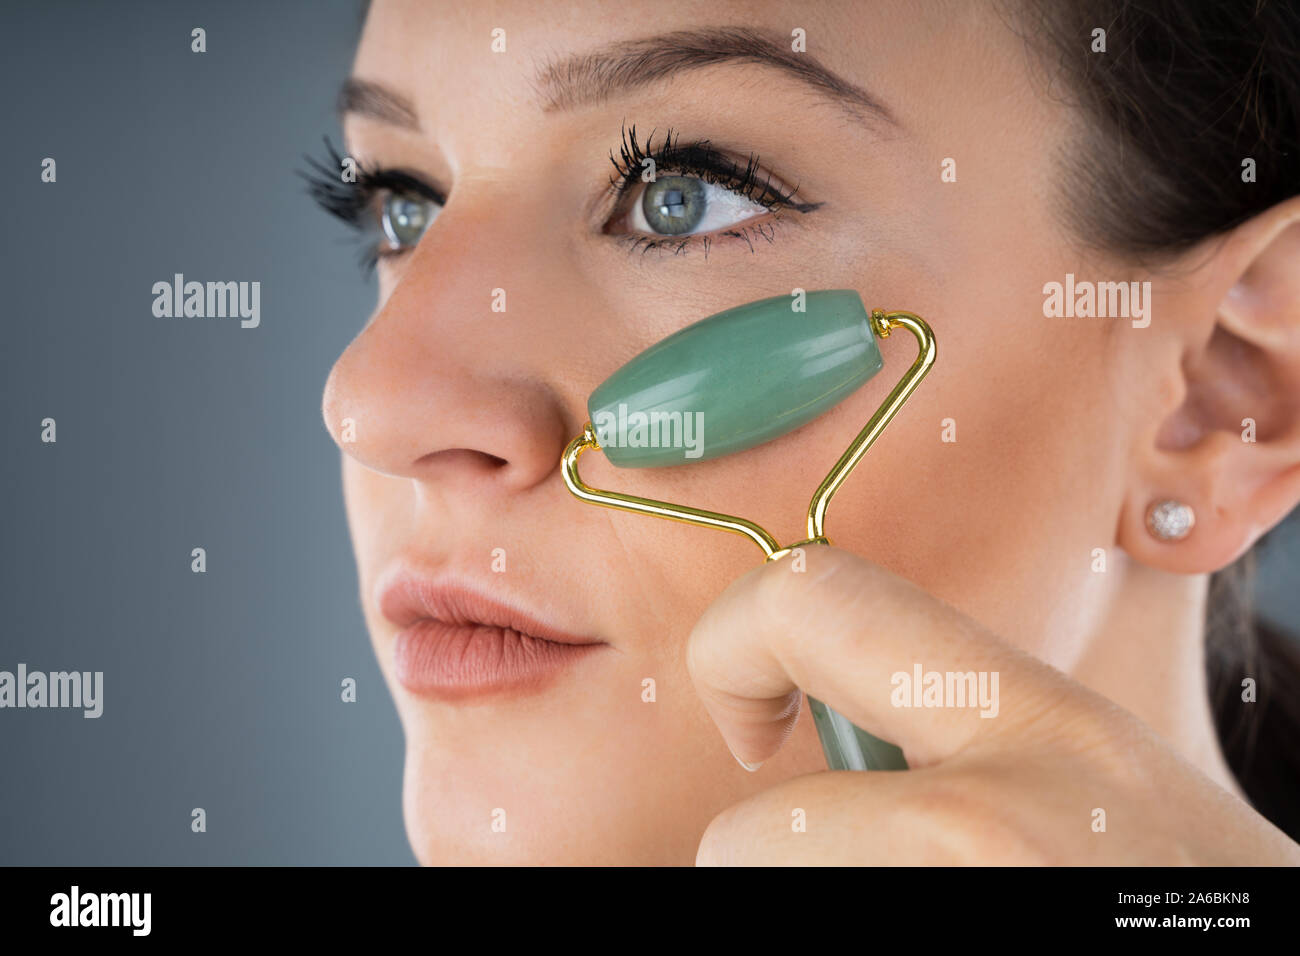 Young Woman Using Jade Roller On Her Face Stock Photo